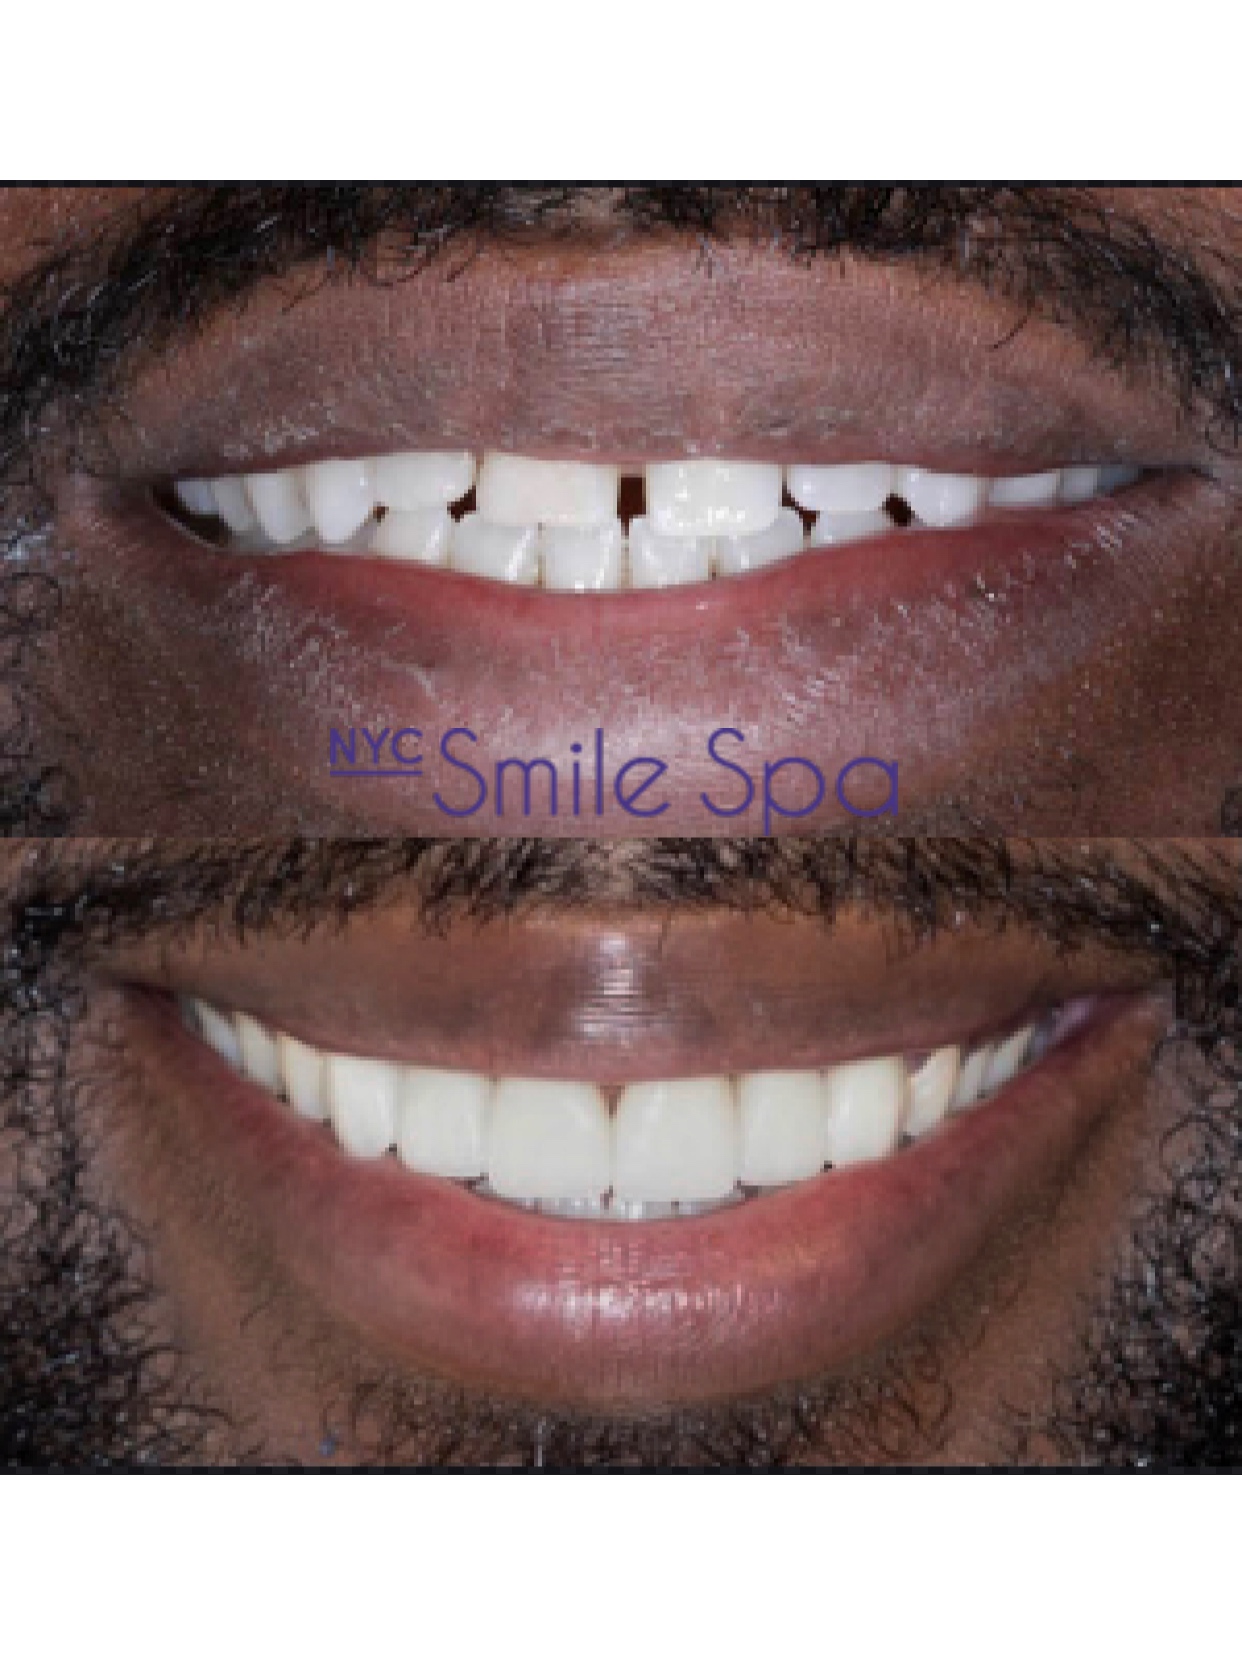 CLOSED SPACES AND TRANSFORMED SMILE WITH PORCELAIN VENEERS